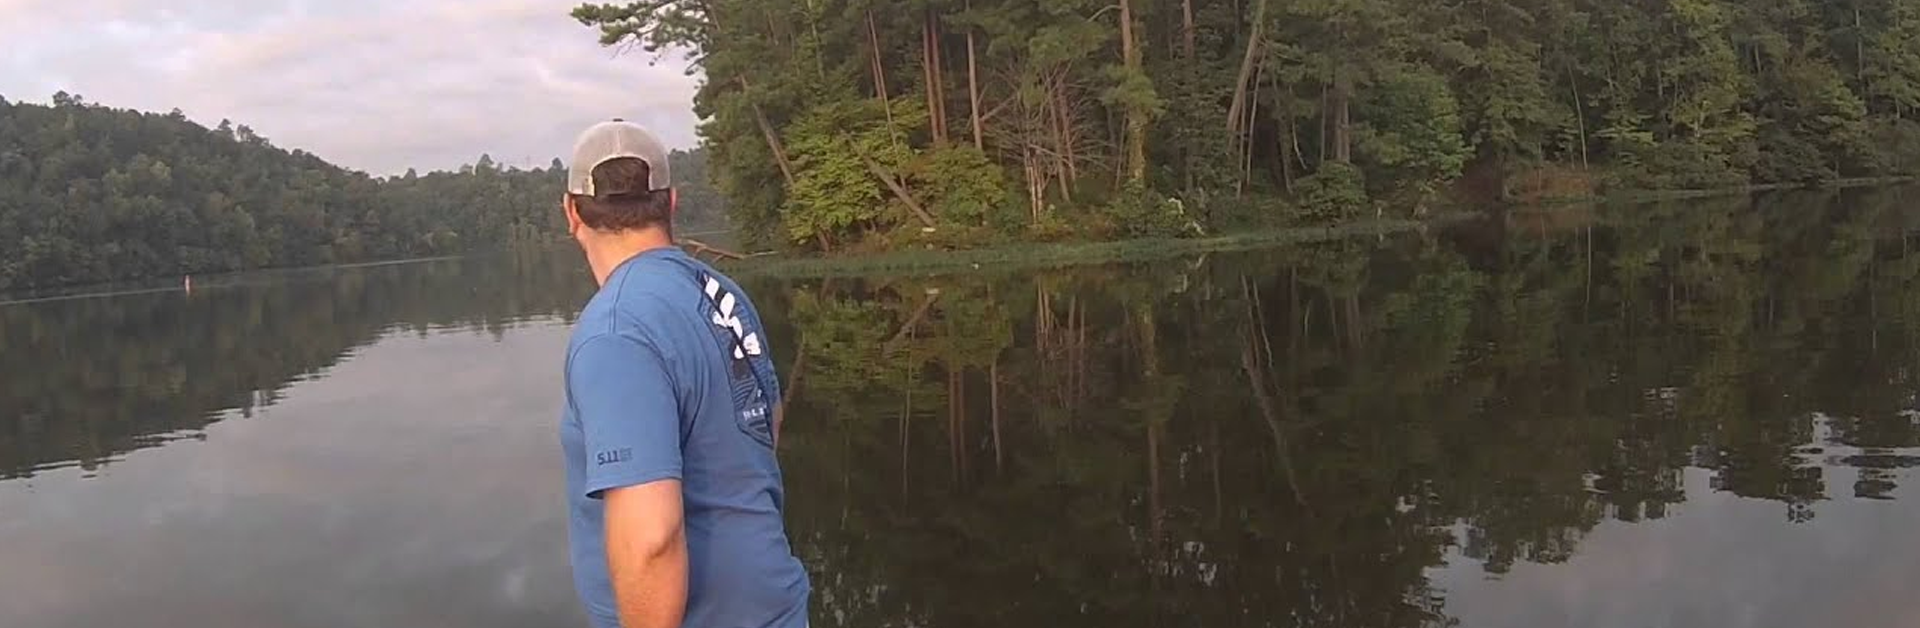 Catching Catfish Like You’ve Never Seen It Before